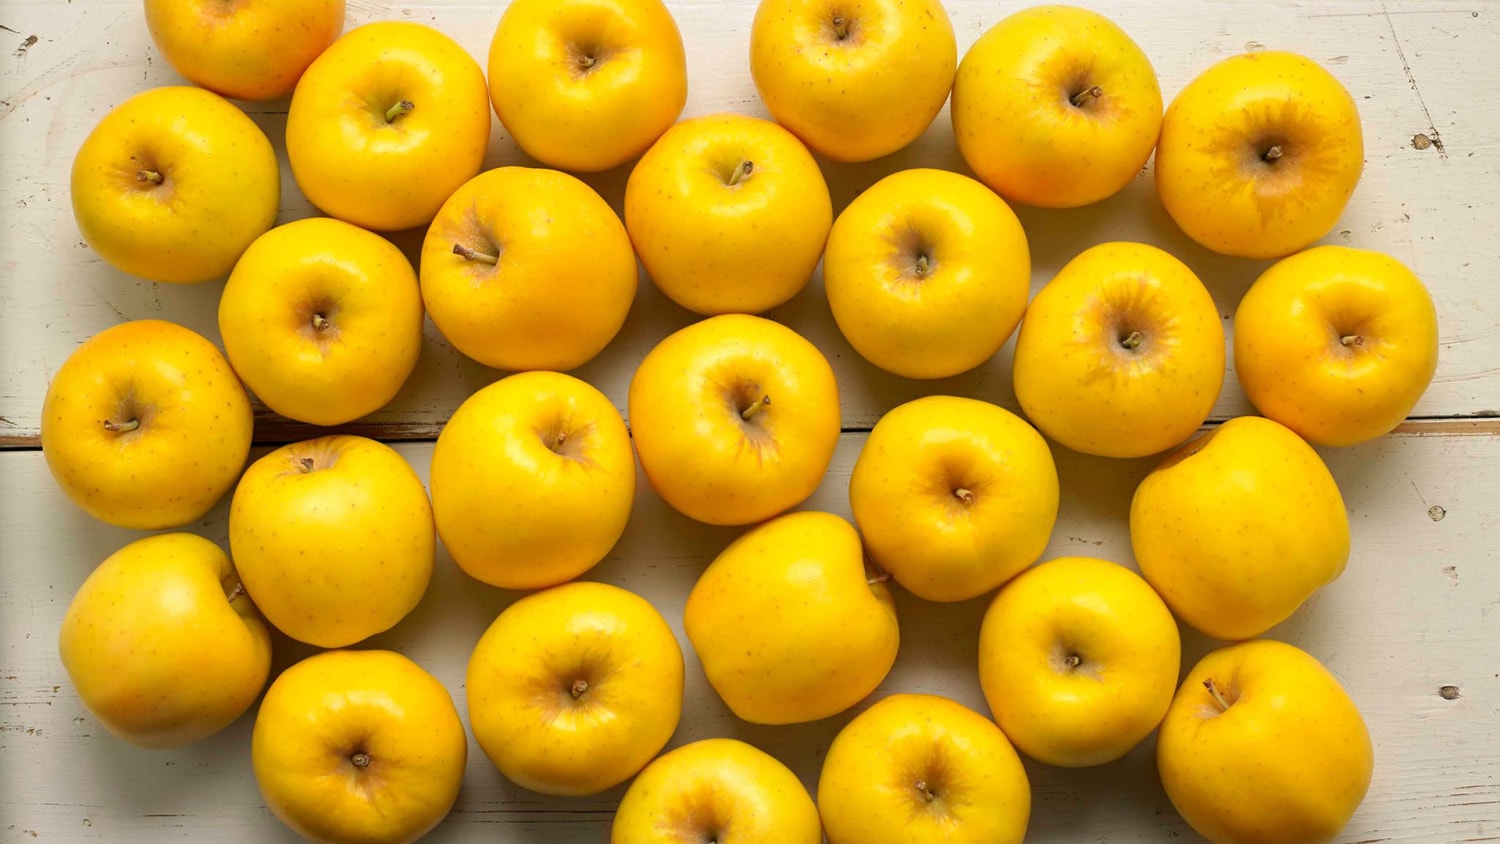 These apples won't turn brown after being sliced — and they're non-GMO